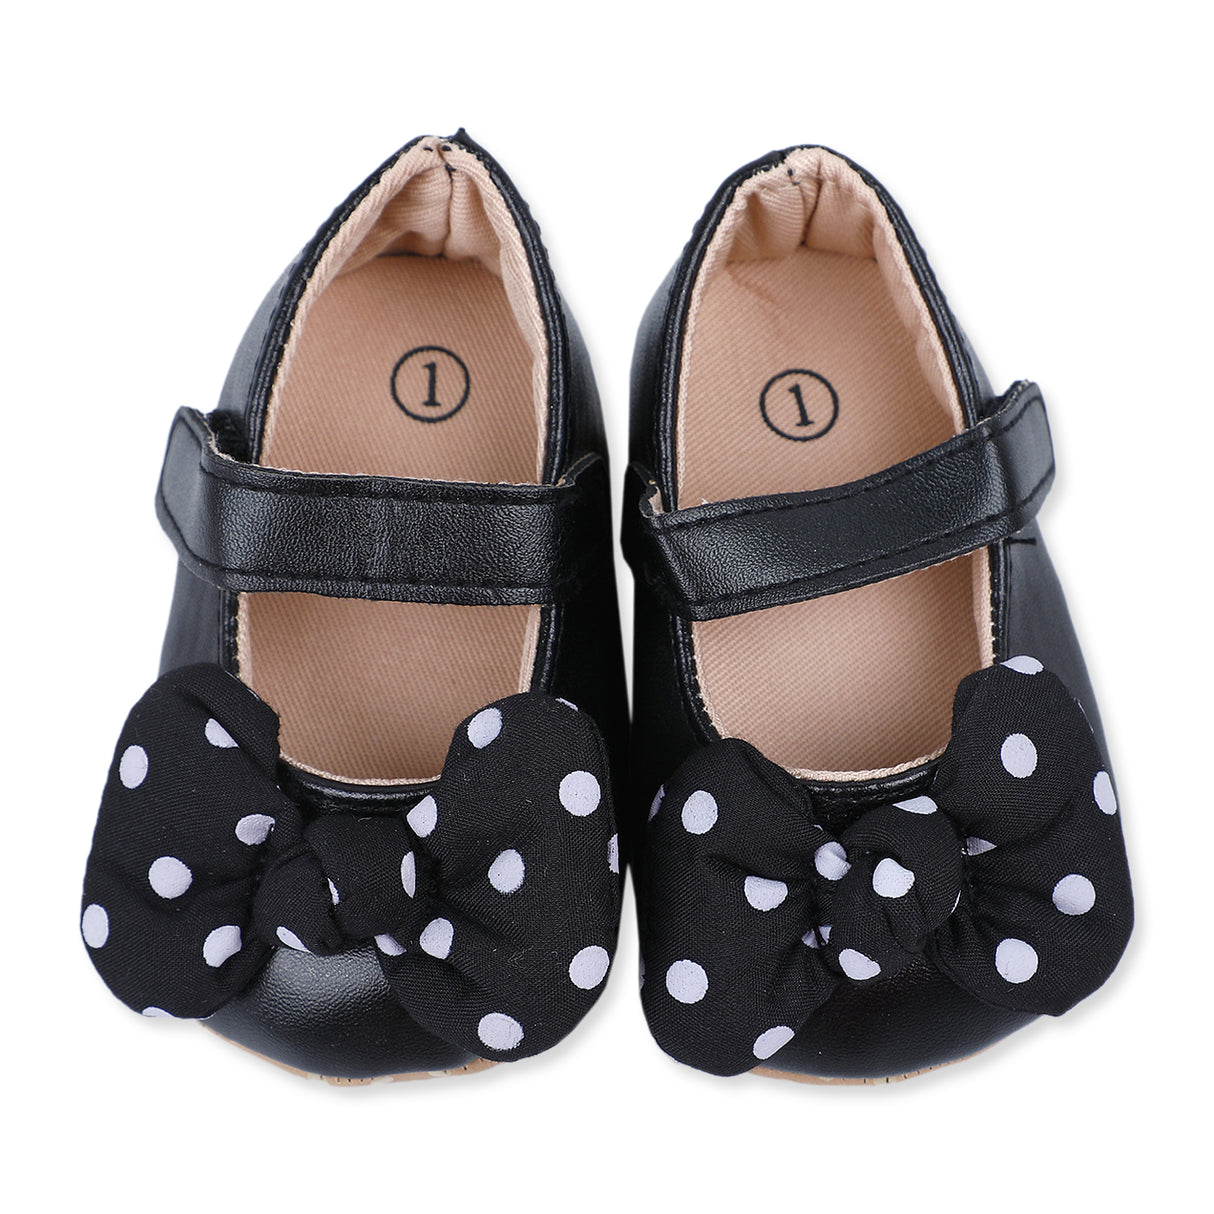 Dotted Bow Girls Anti-Skid Ballerina Booties